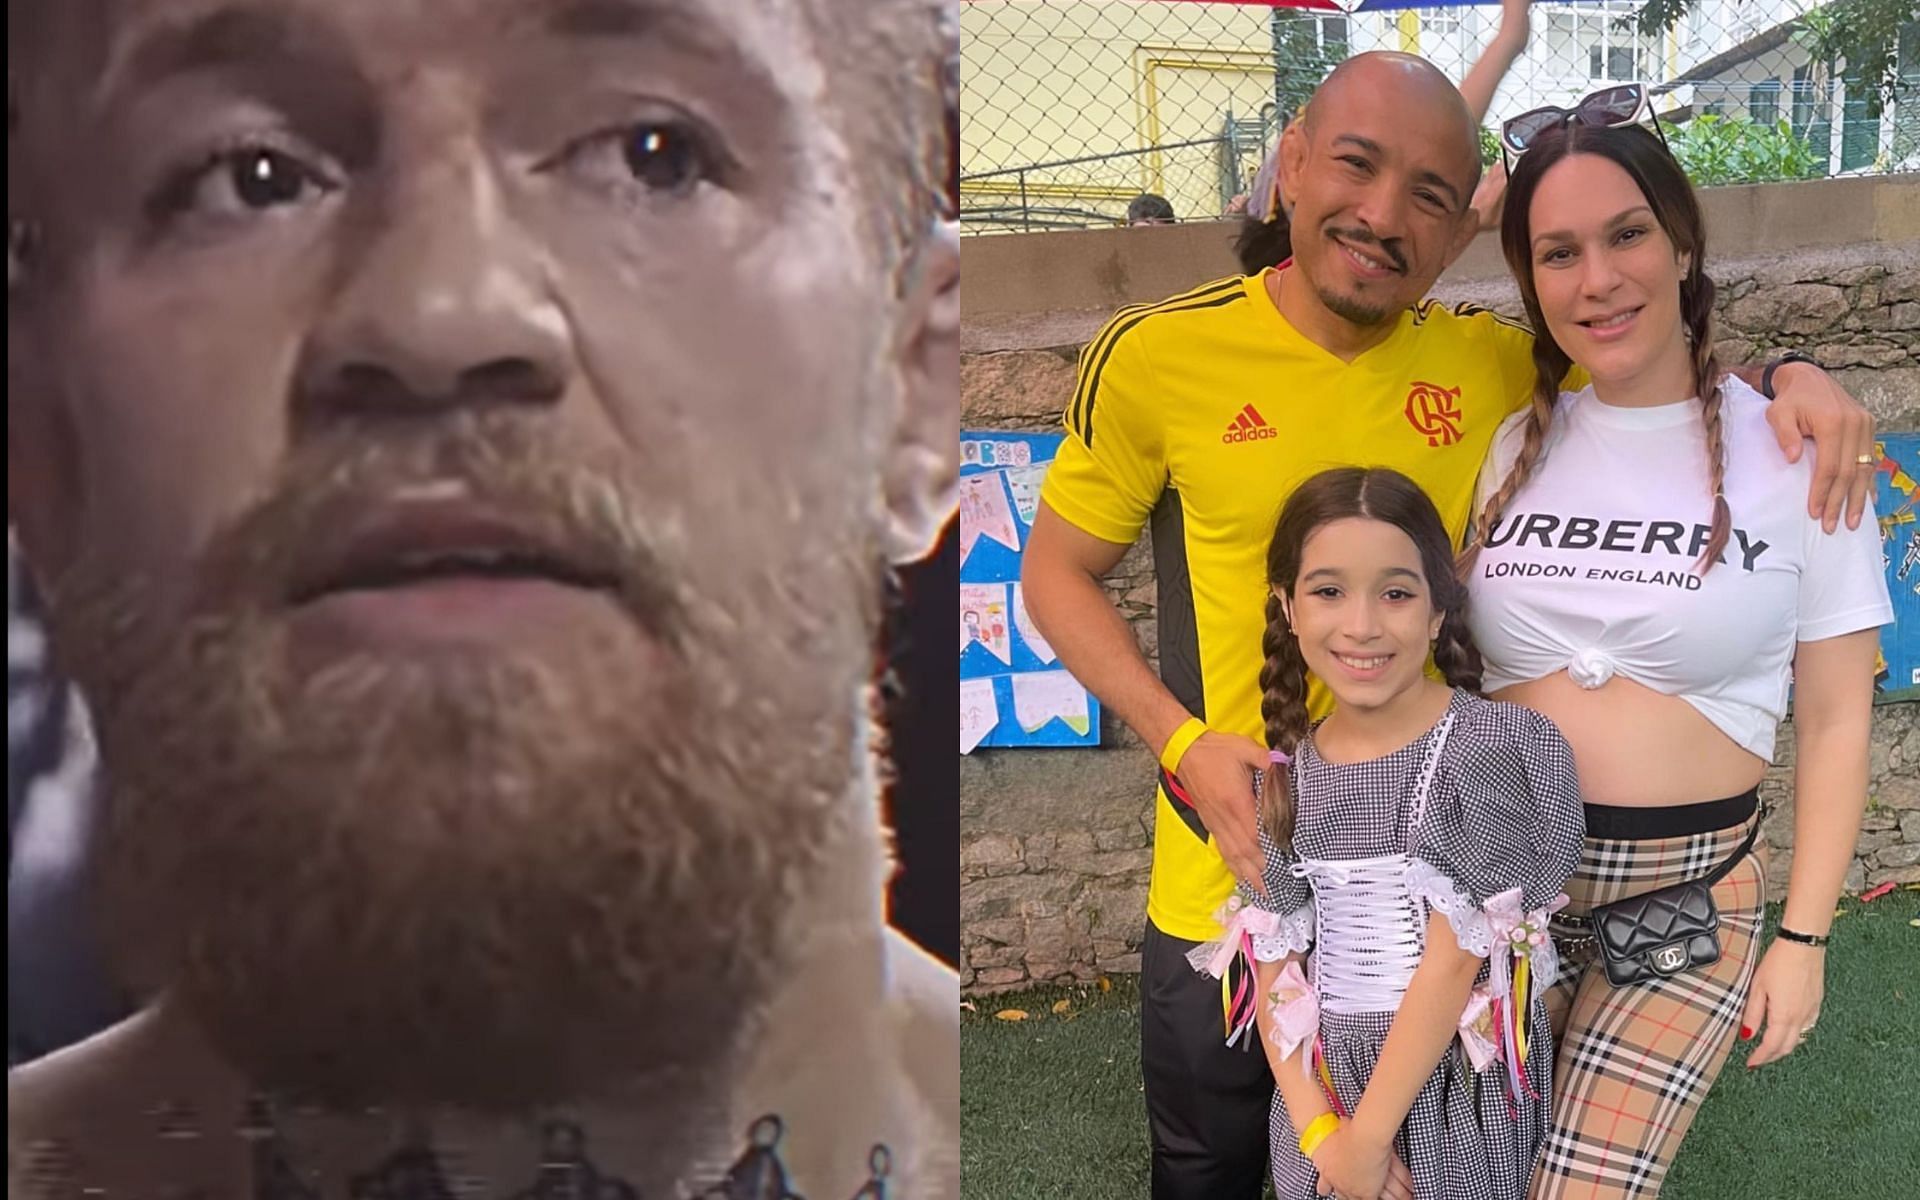 Conor McGregor (left) and Jose Aldo with his family (right) [Images courtesy of @THE MMA WANNABE YouTube and @josealdojuniorofficial Instagram]